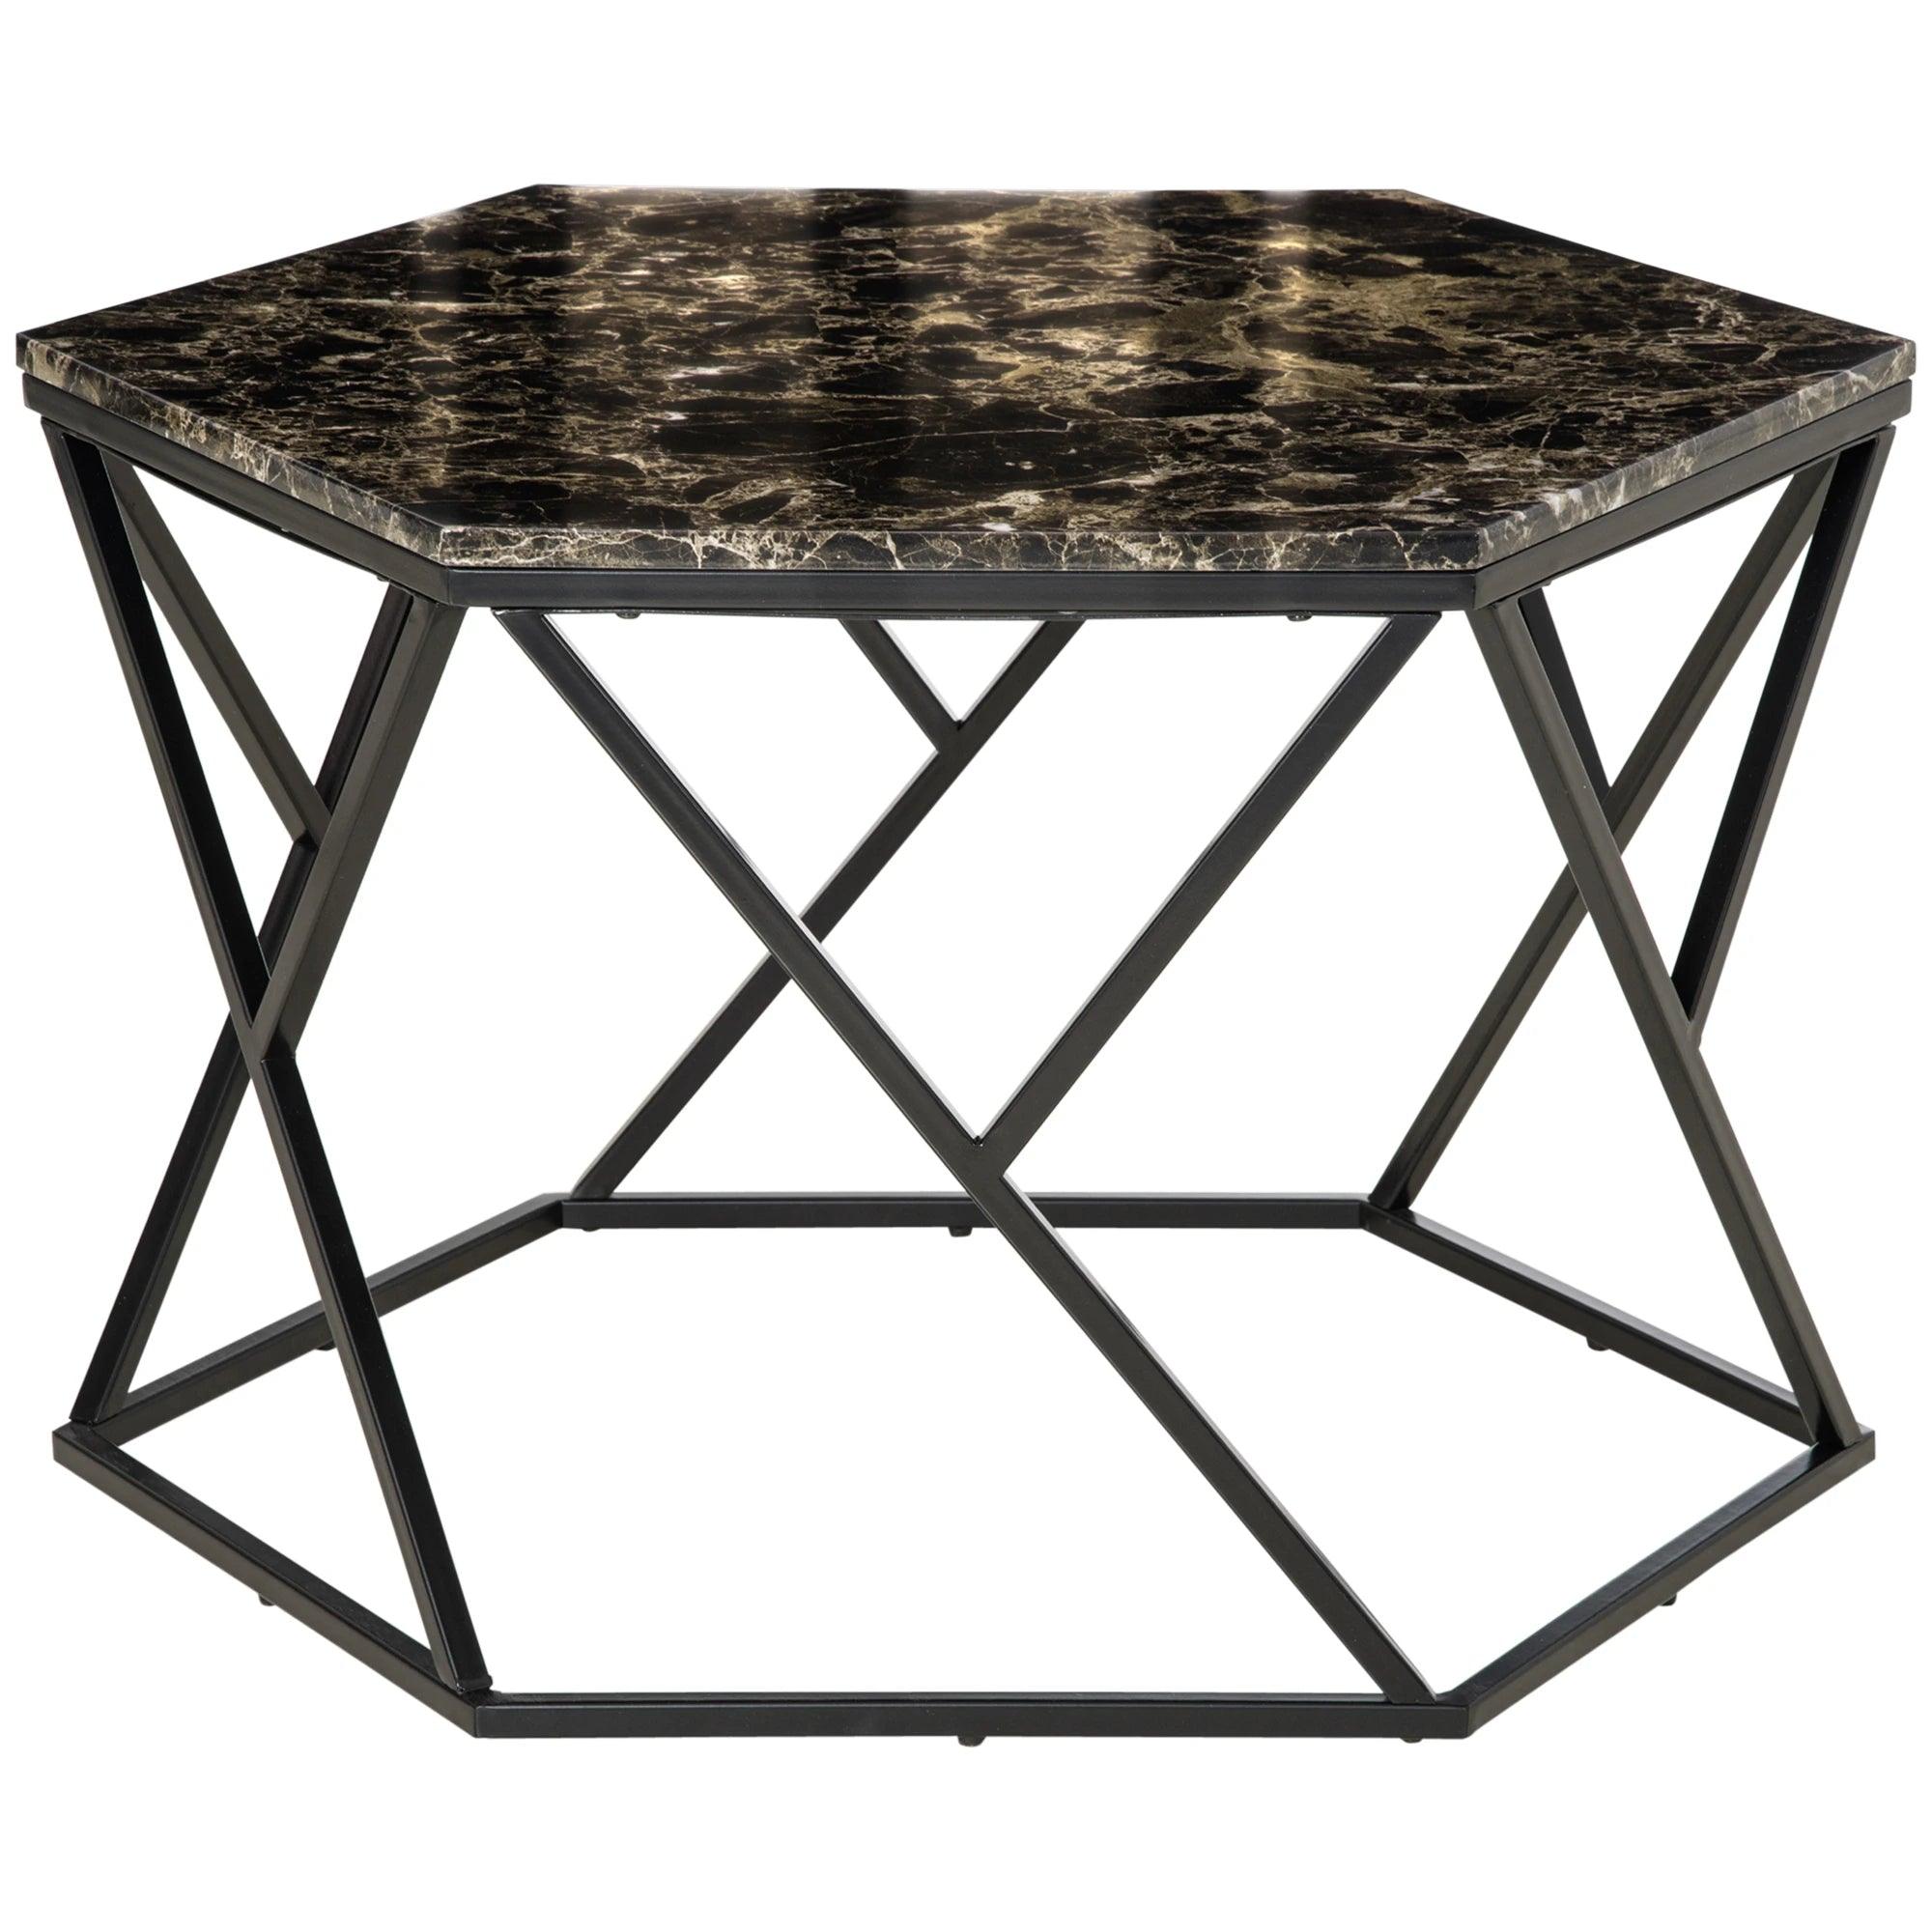 Coffee Table with High Gloss Marble Tabletop, Modern Cocktail Table with Steel Frame for Living Room, Black